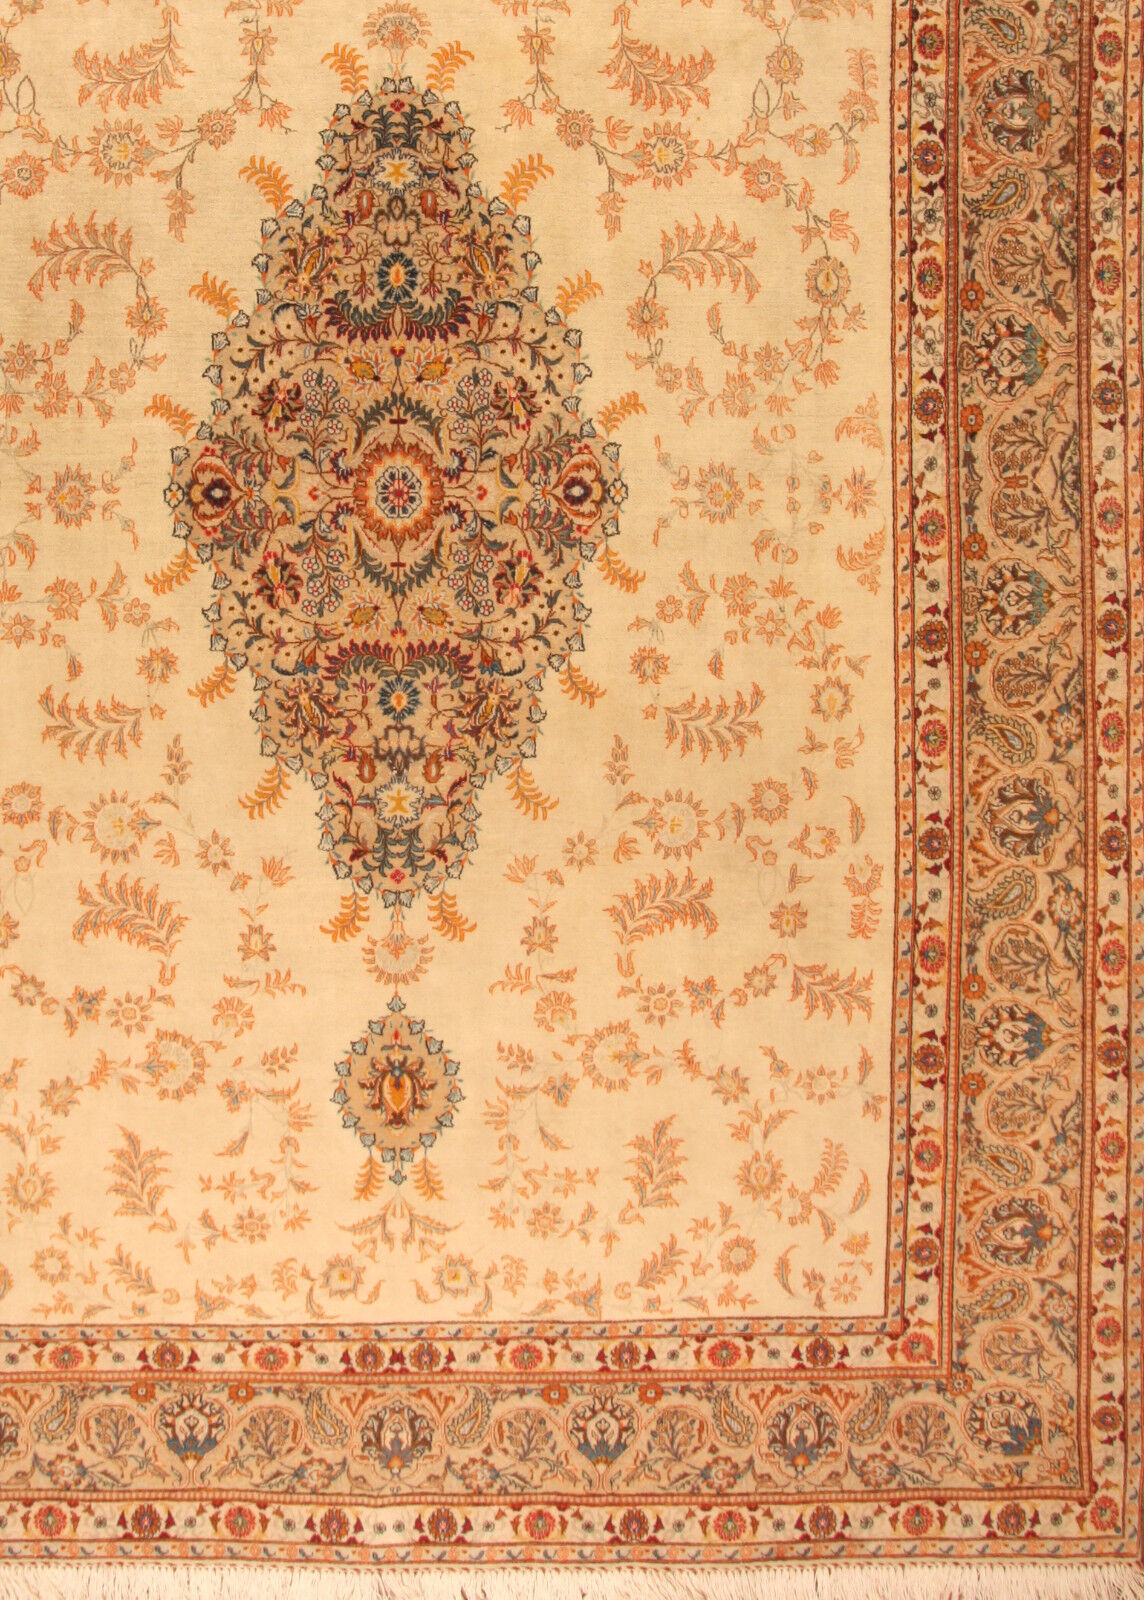 Angled shot of the Handmade Contemporary Persian Style Tabriz Rug complementing furniture